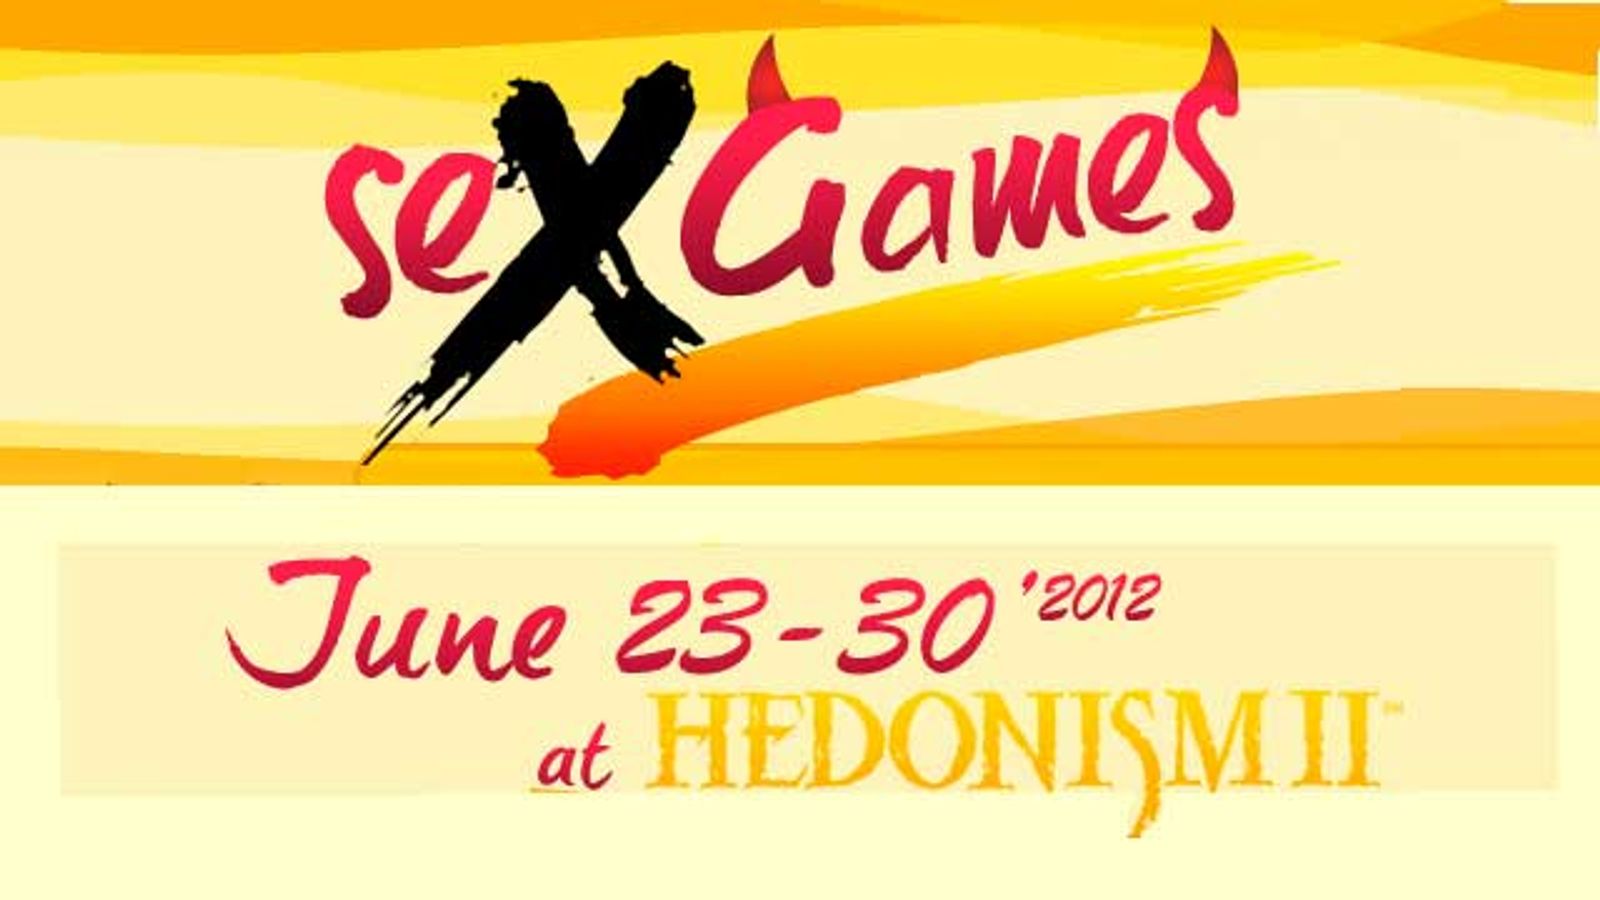 Join Hosts Susan & Bobby Lee For the S.E.X.Games at Hedonism II